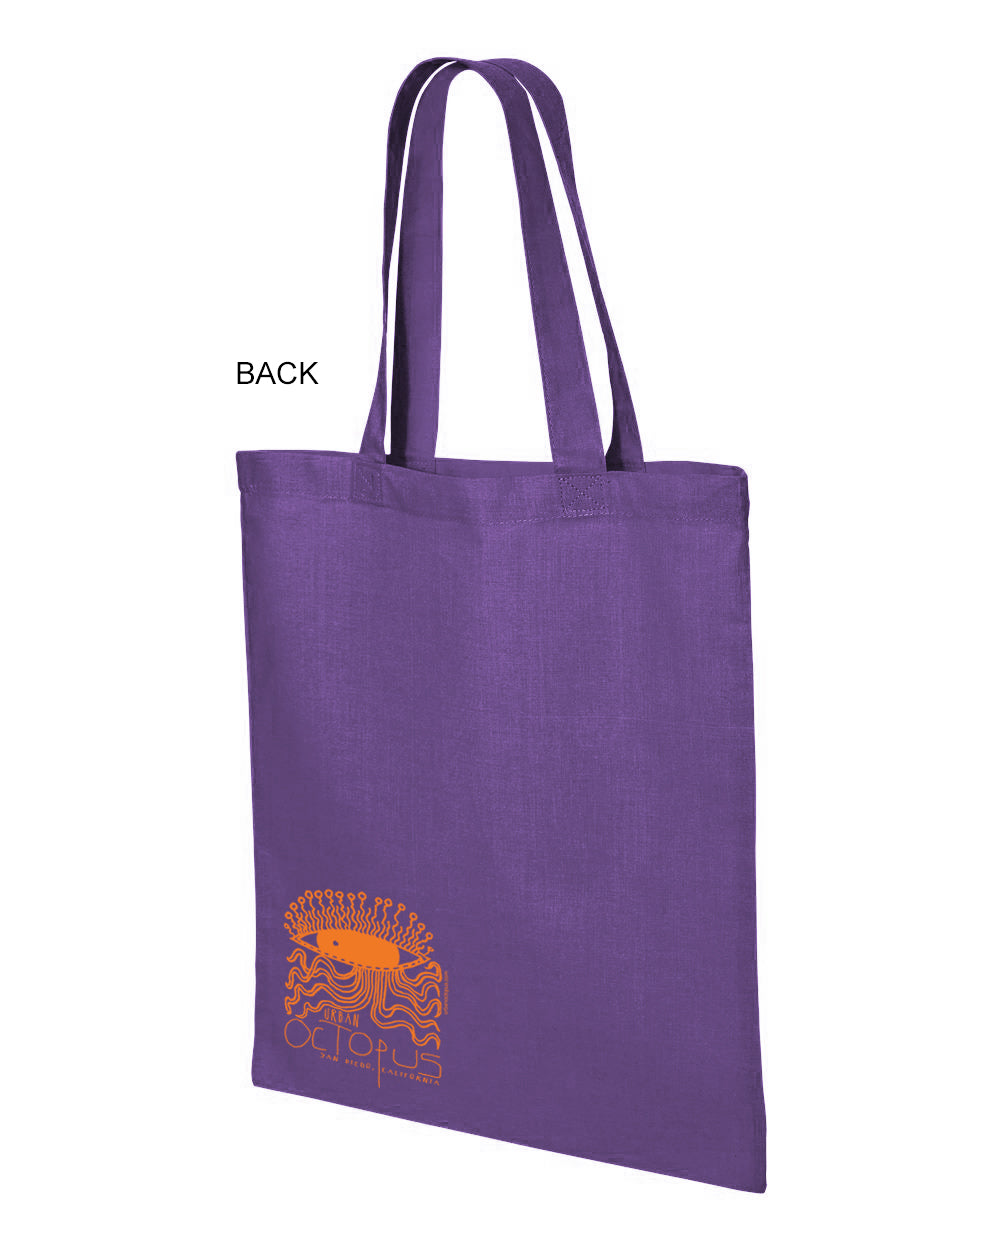 "The Great Shark" Tote canvas bag